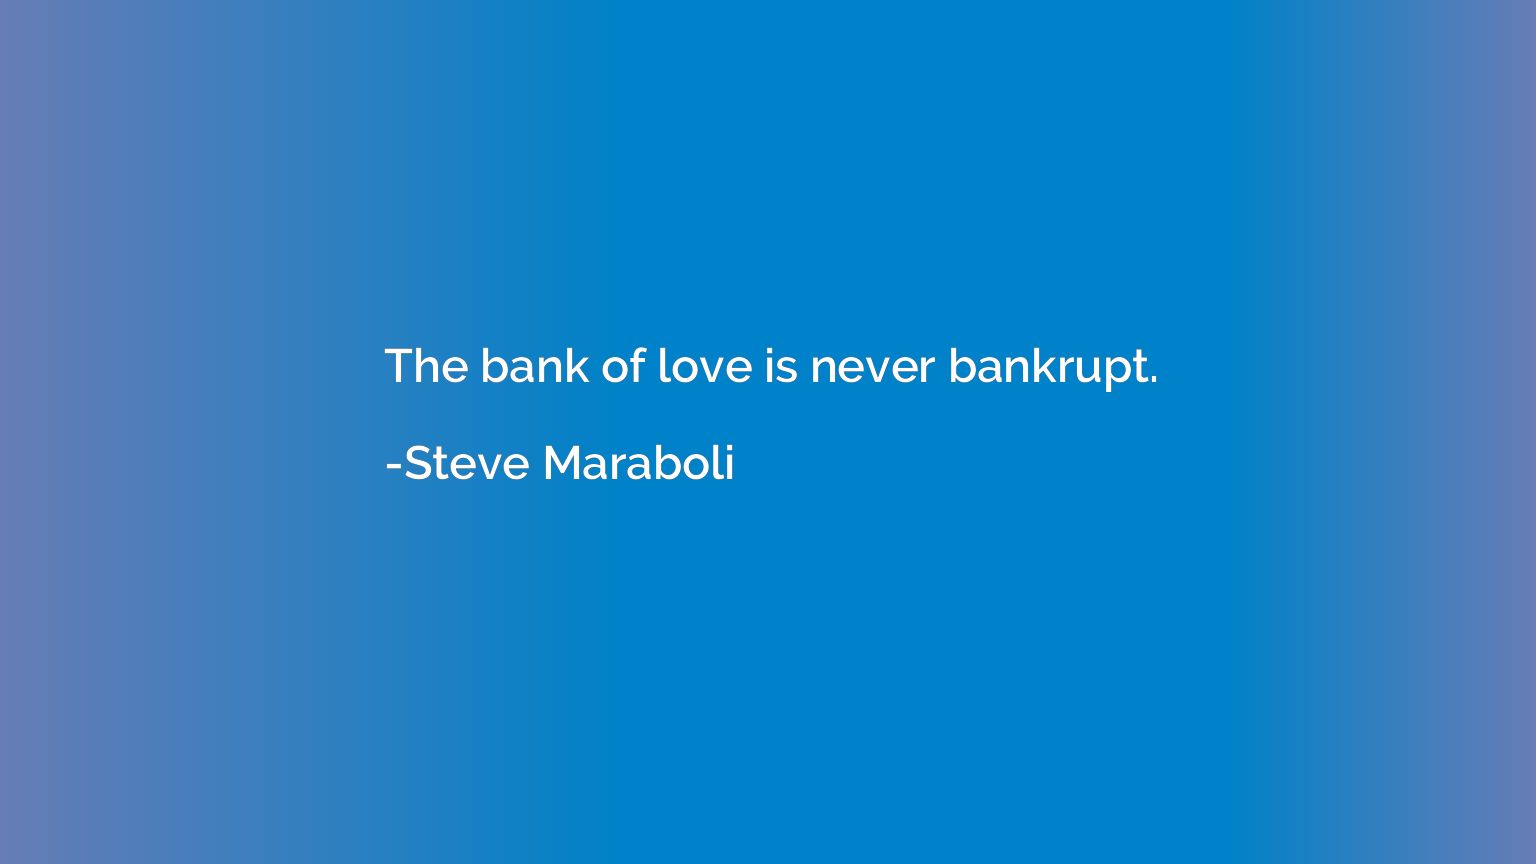 The bank of love is never bankrupt.